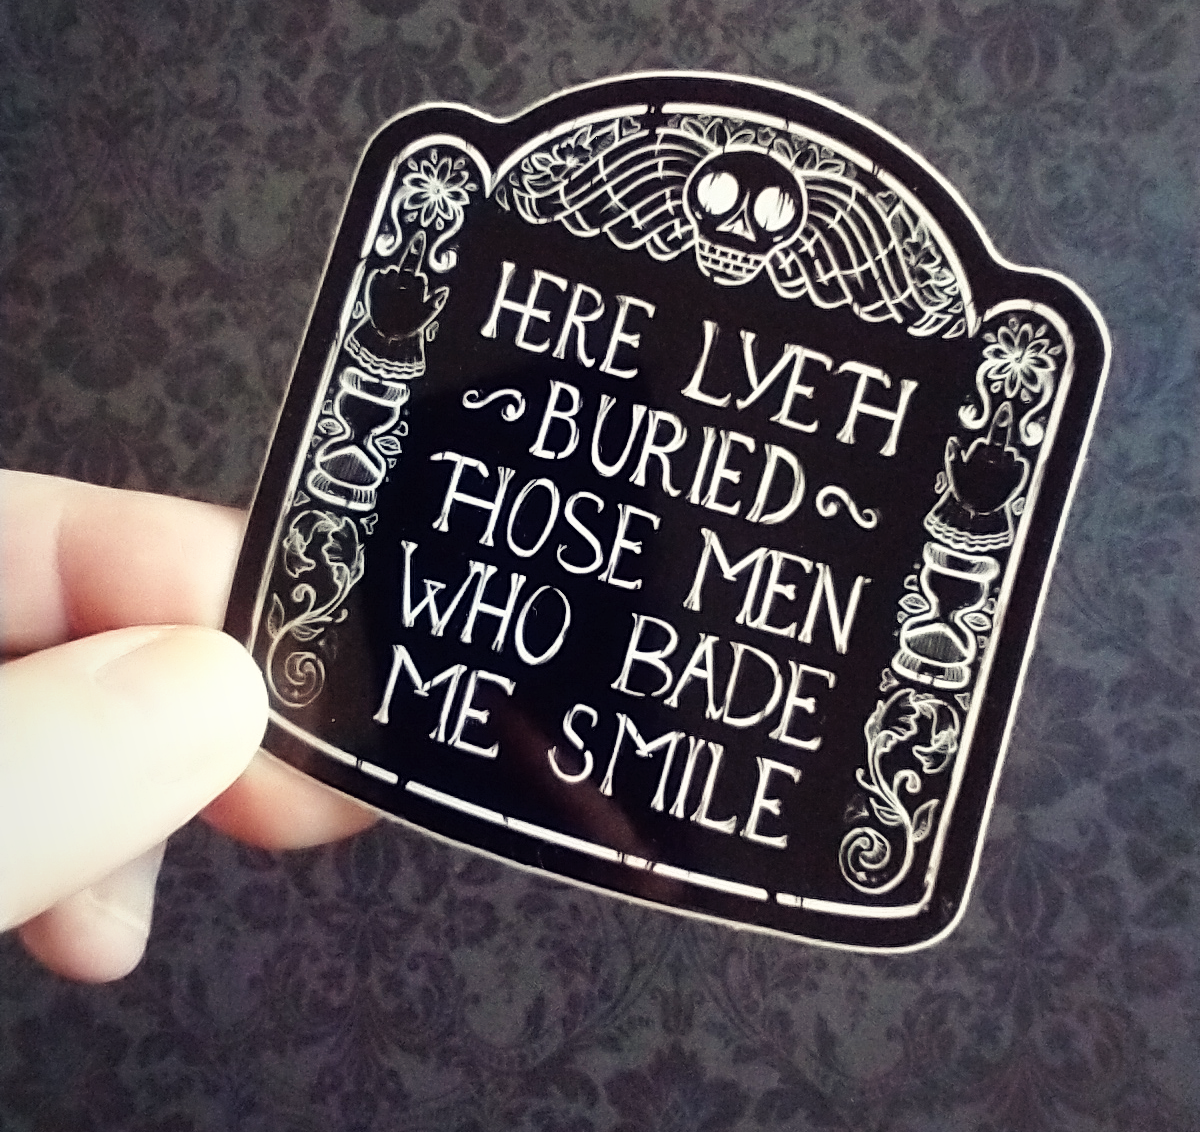 A hand holding a black and white sticker bearing an illustration of a headstone, which reads, "Here lyeth buried those men who bade me smile".